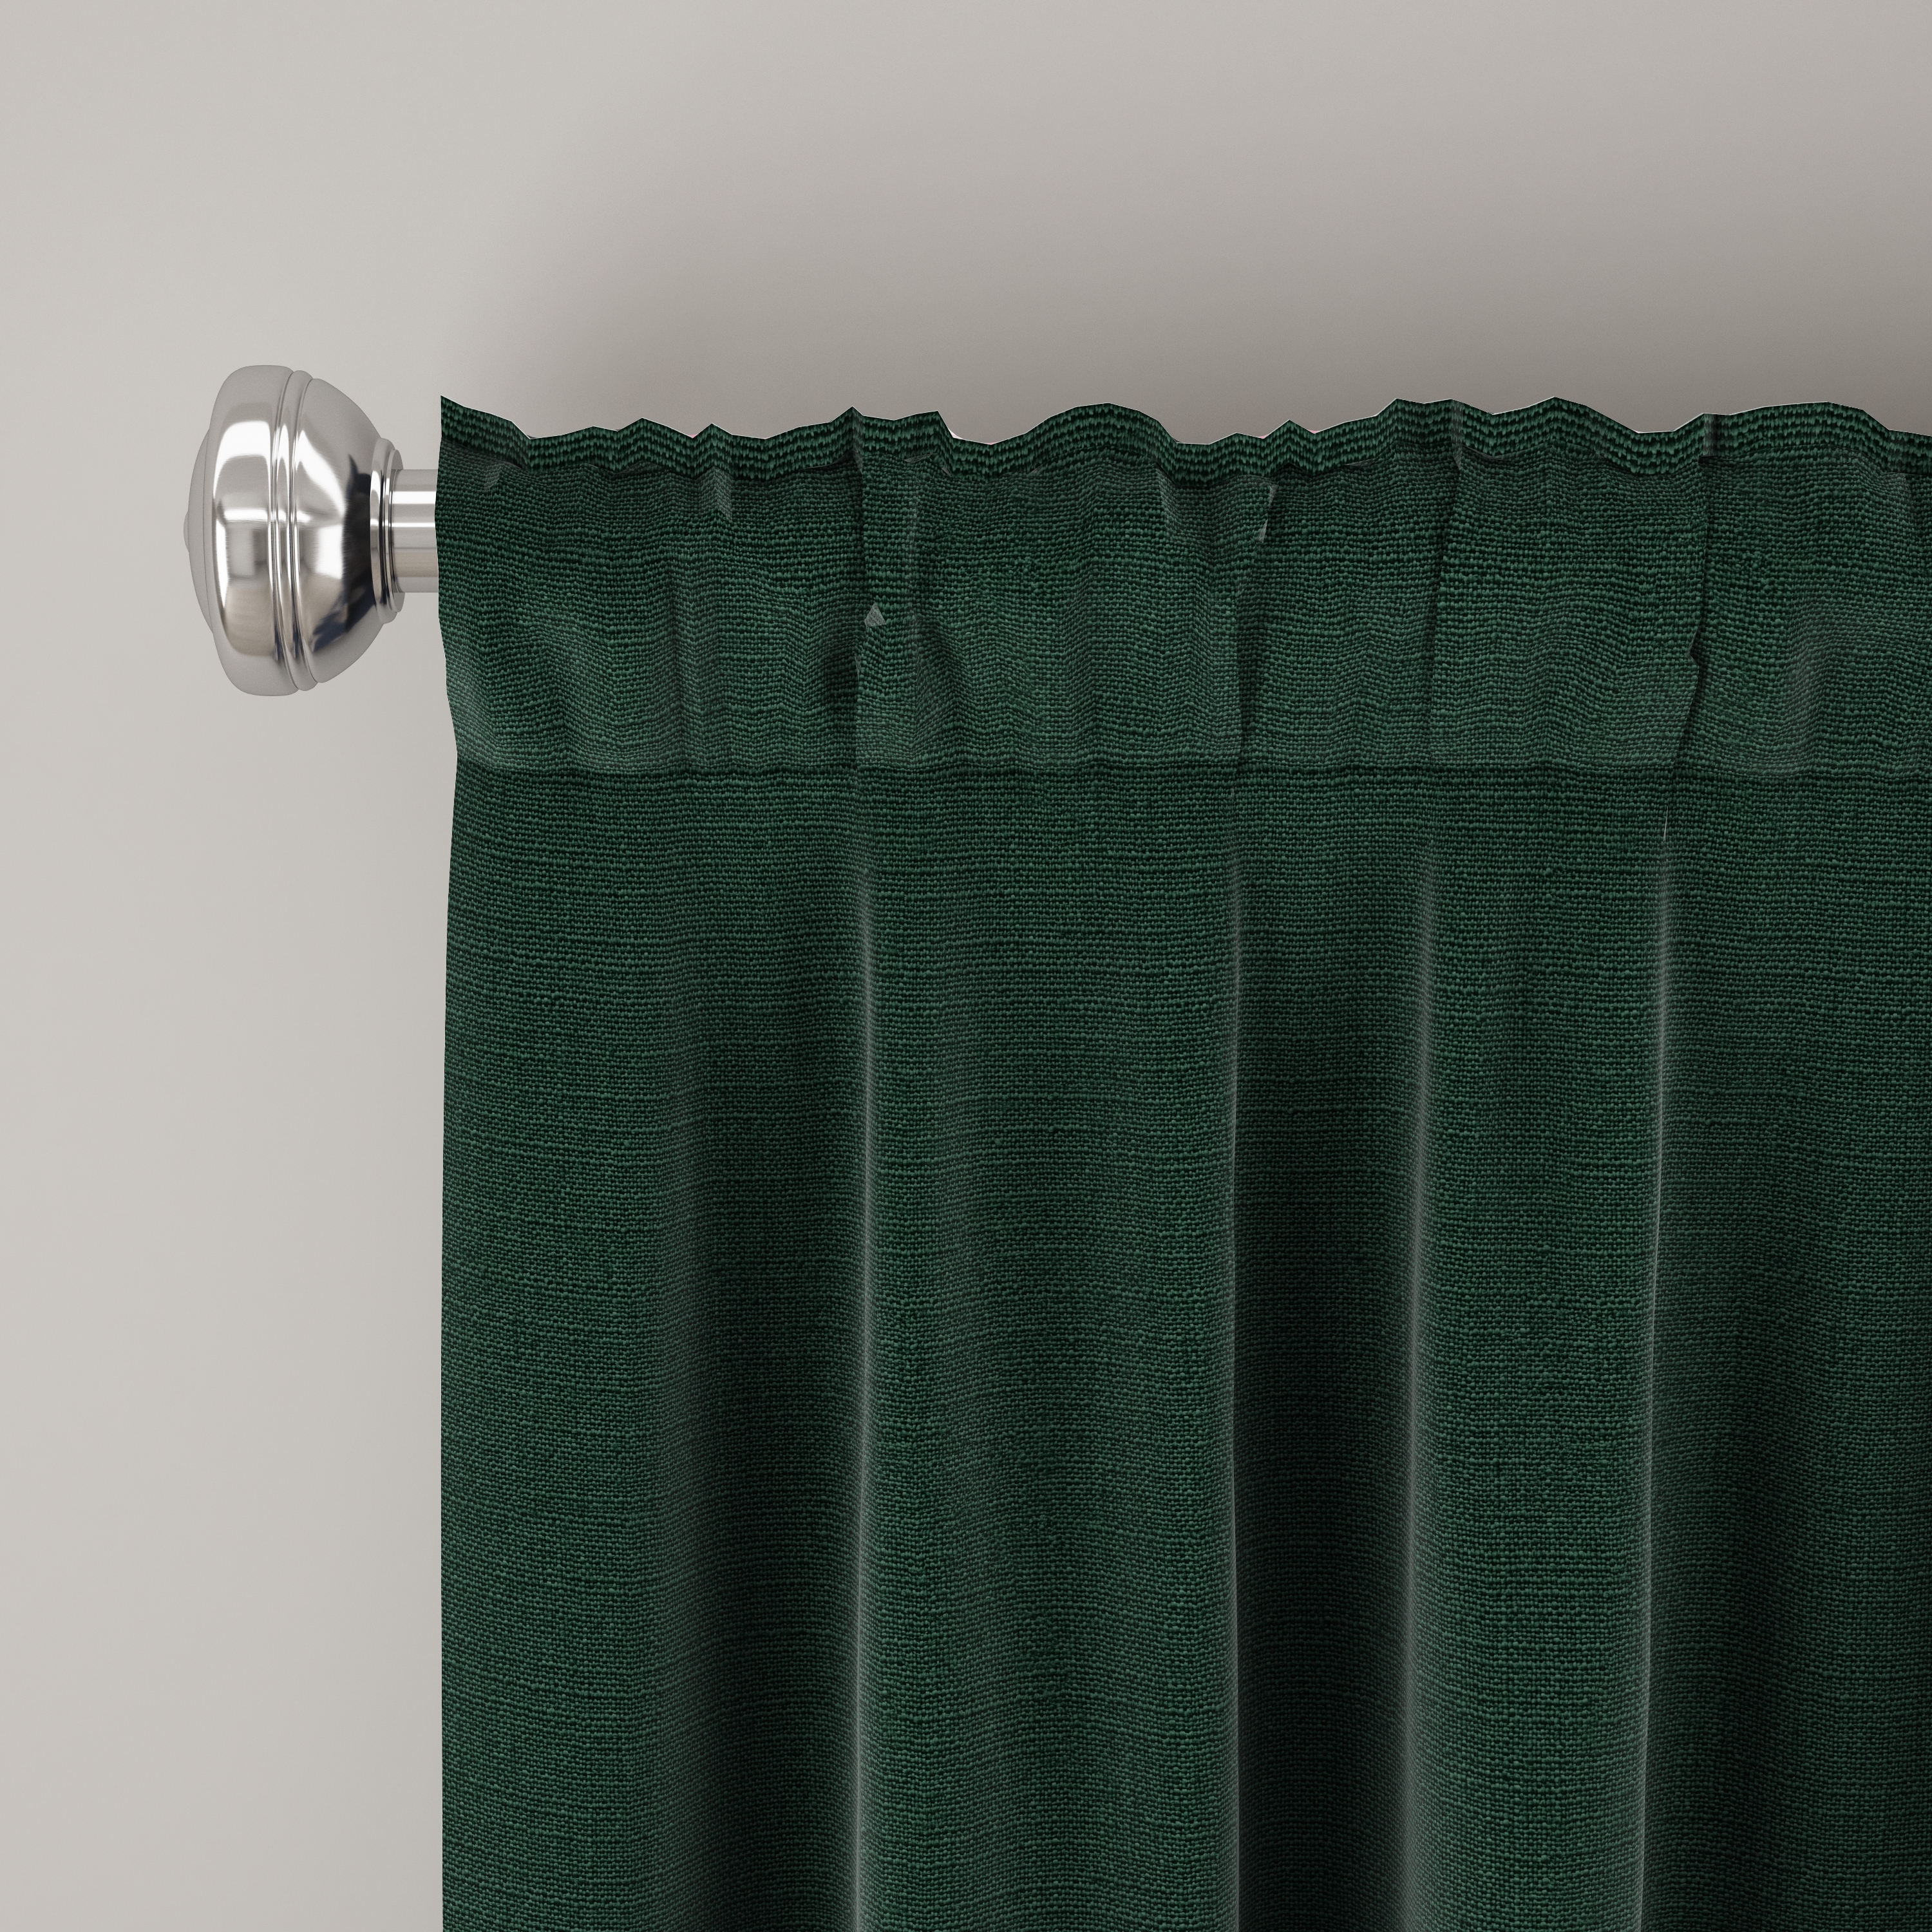 Conifer Green Curtain Panel, 108" x 50" Unlined - Image 3